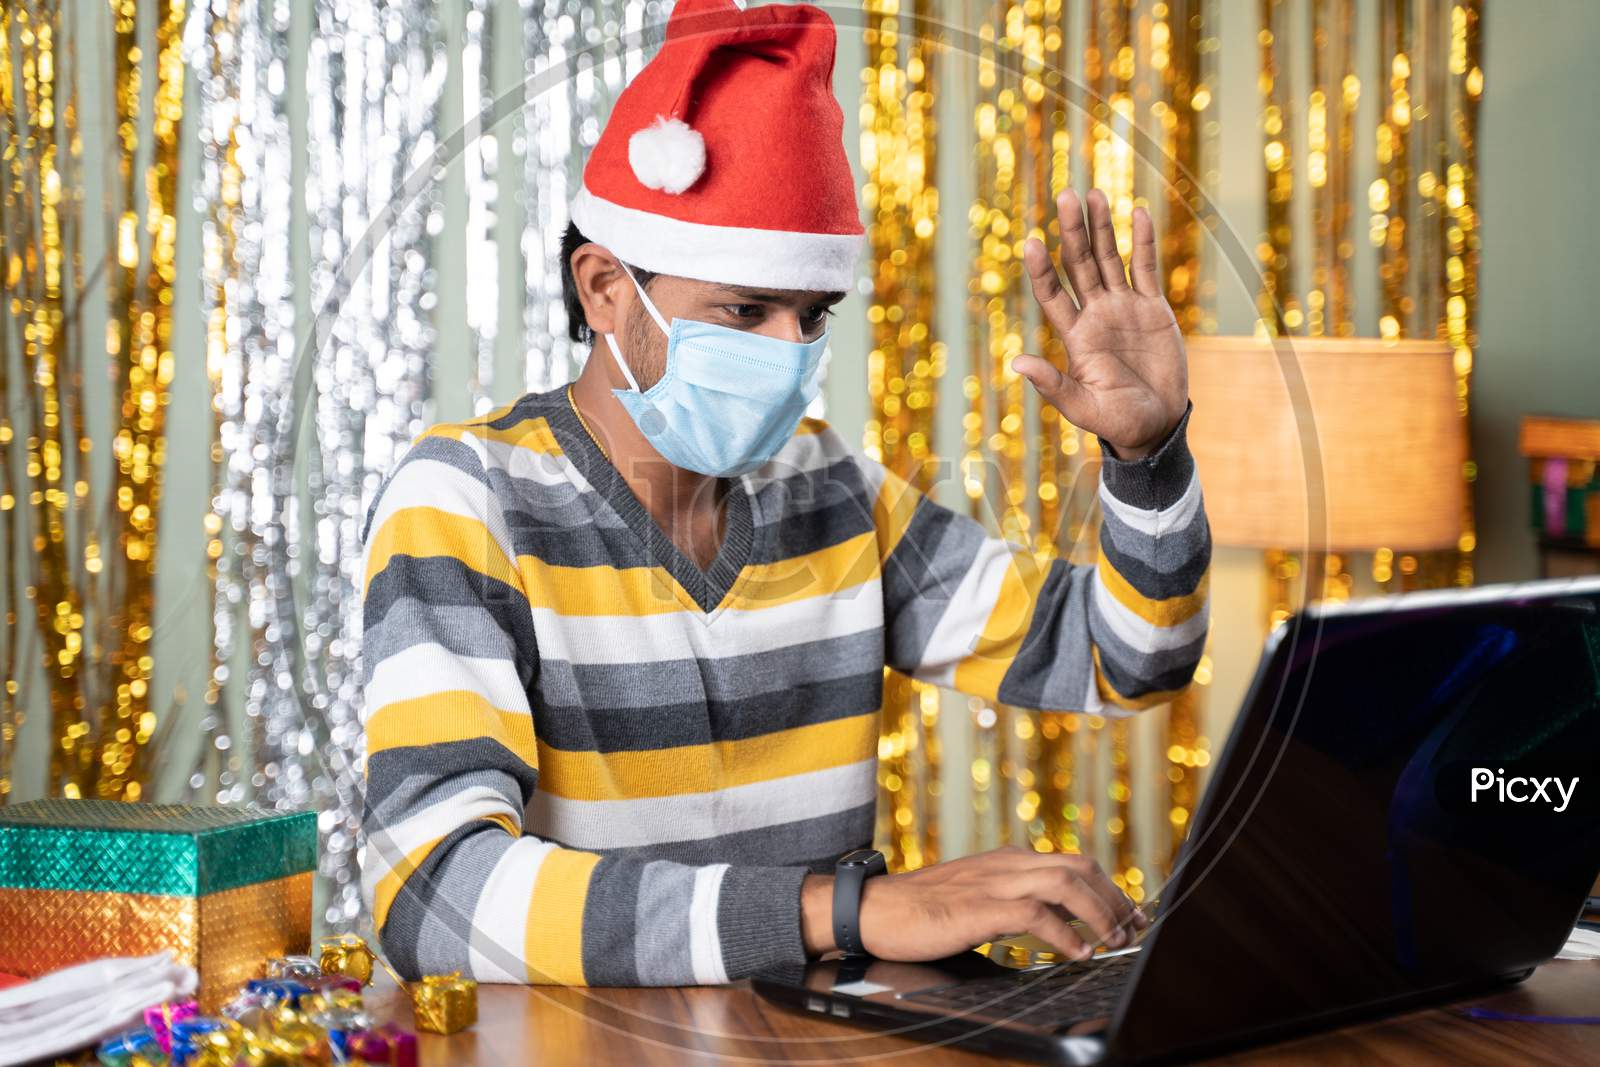 Young Man In Medical Mask On Video Call In Laptop During Christmas Or New Year Celebration Eve With Decorated Background And Gifts In Front - Concept Of Work From Home During Holydays.